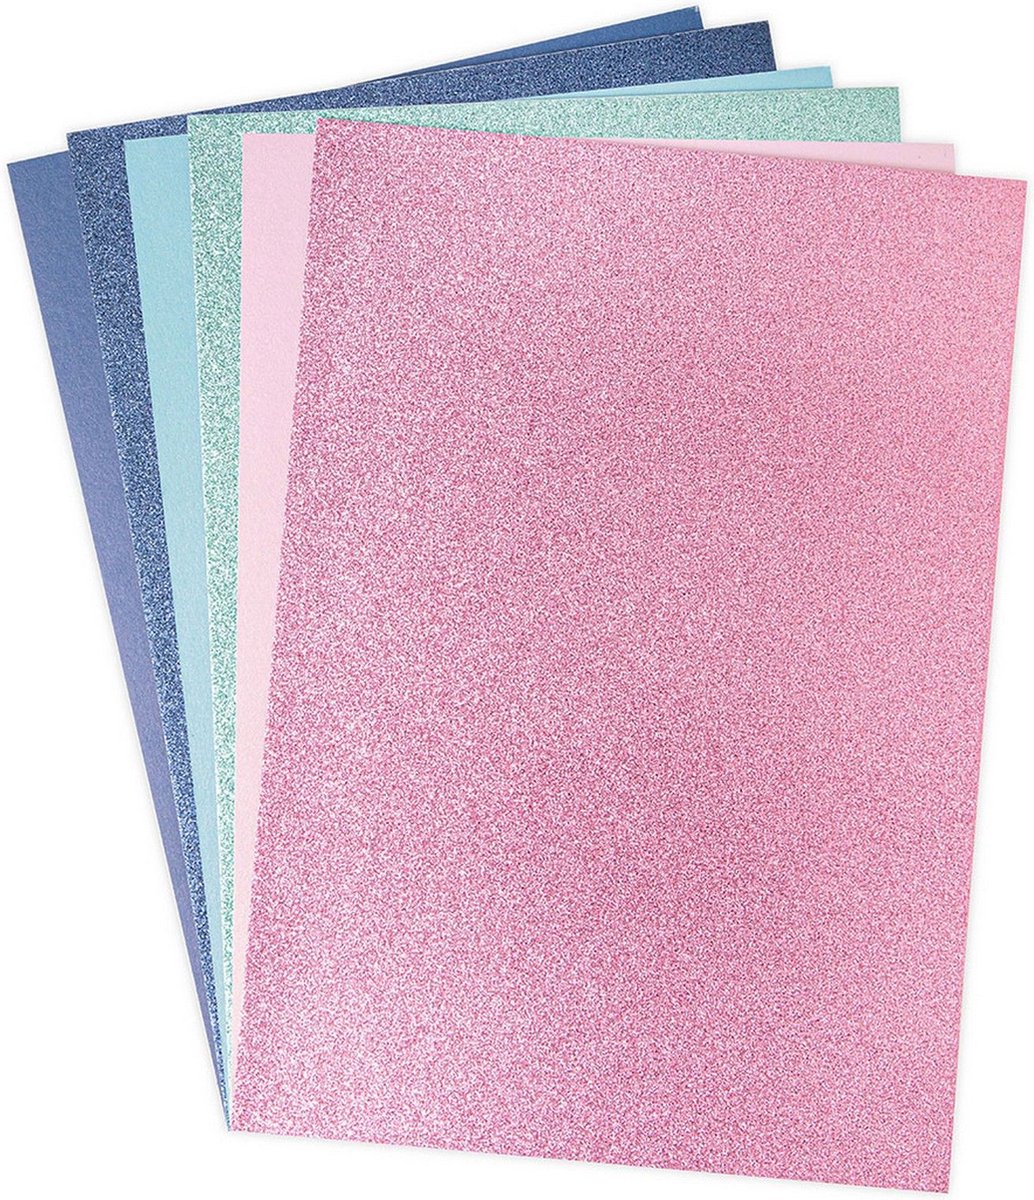 Sizzix Surfacez Opulent Cardstock pack - A4 - Muted 60stuks